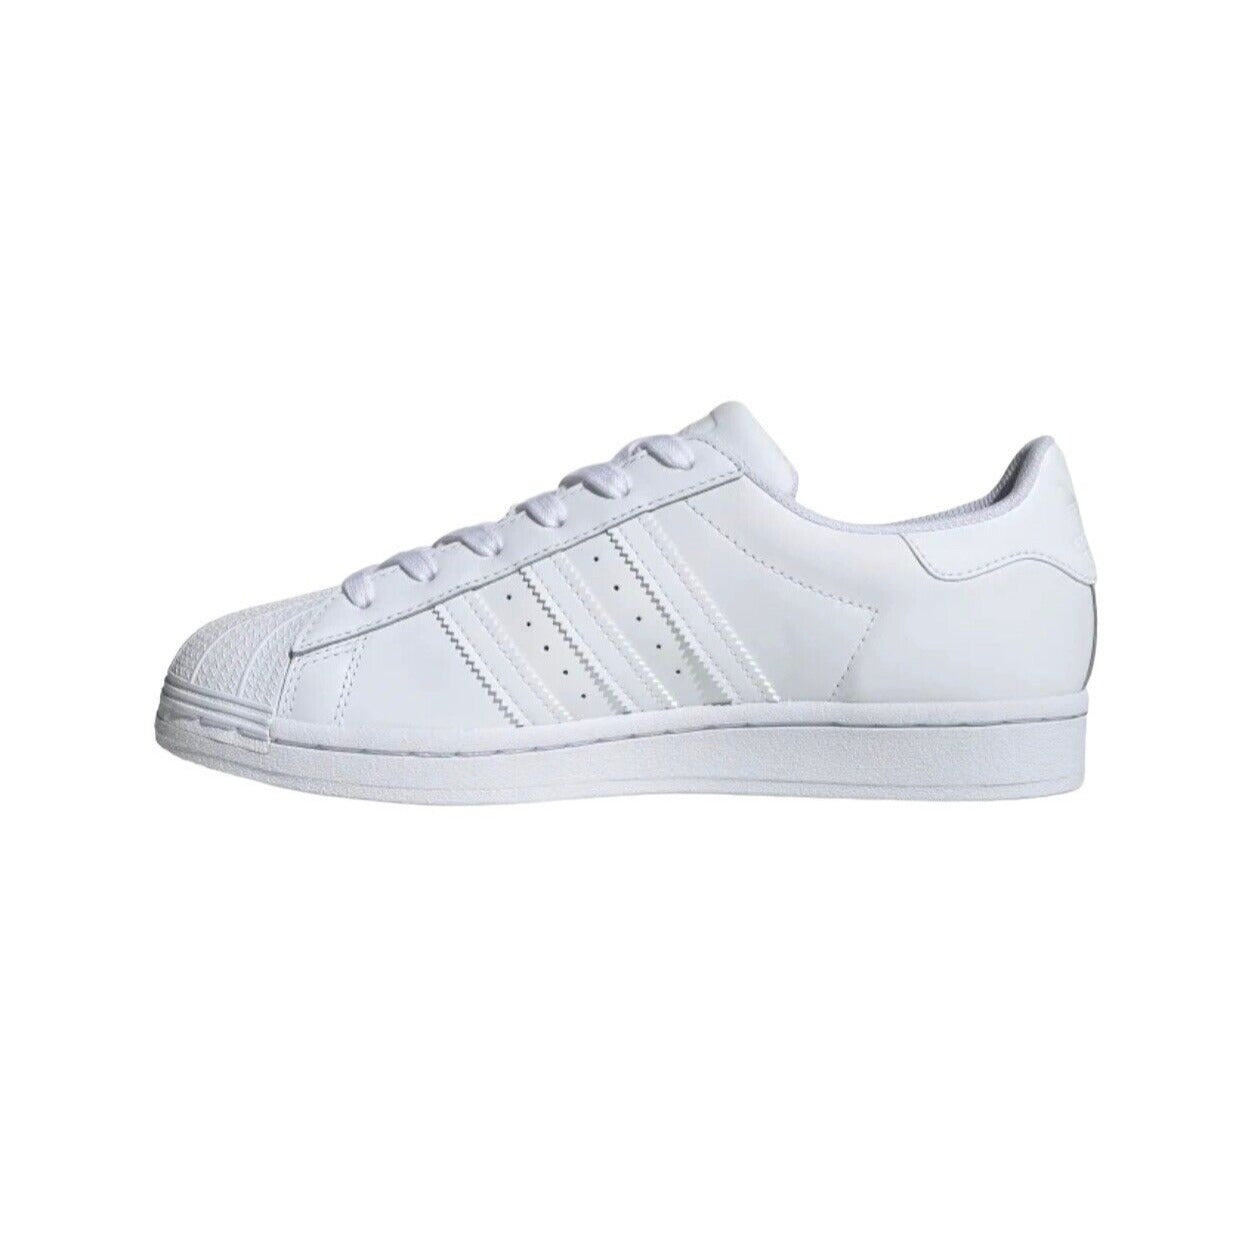 sideview of white Adidas sneaker